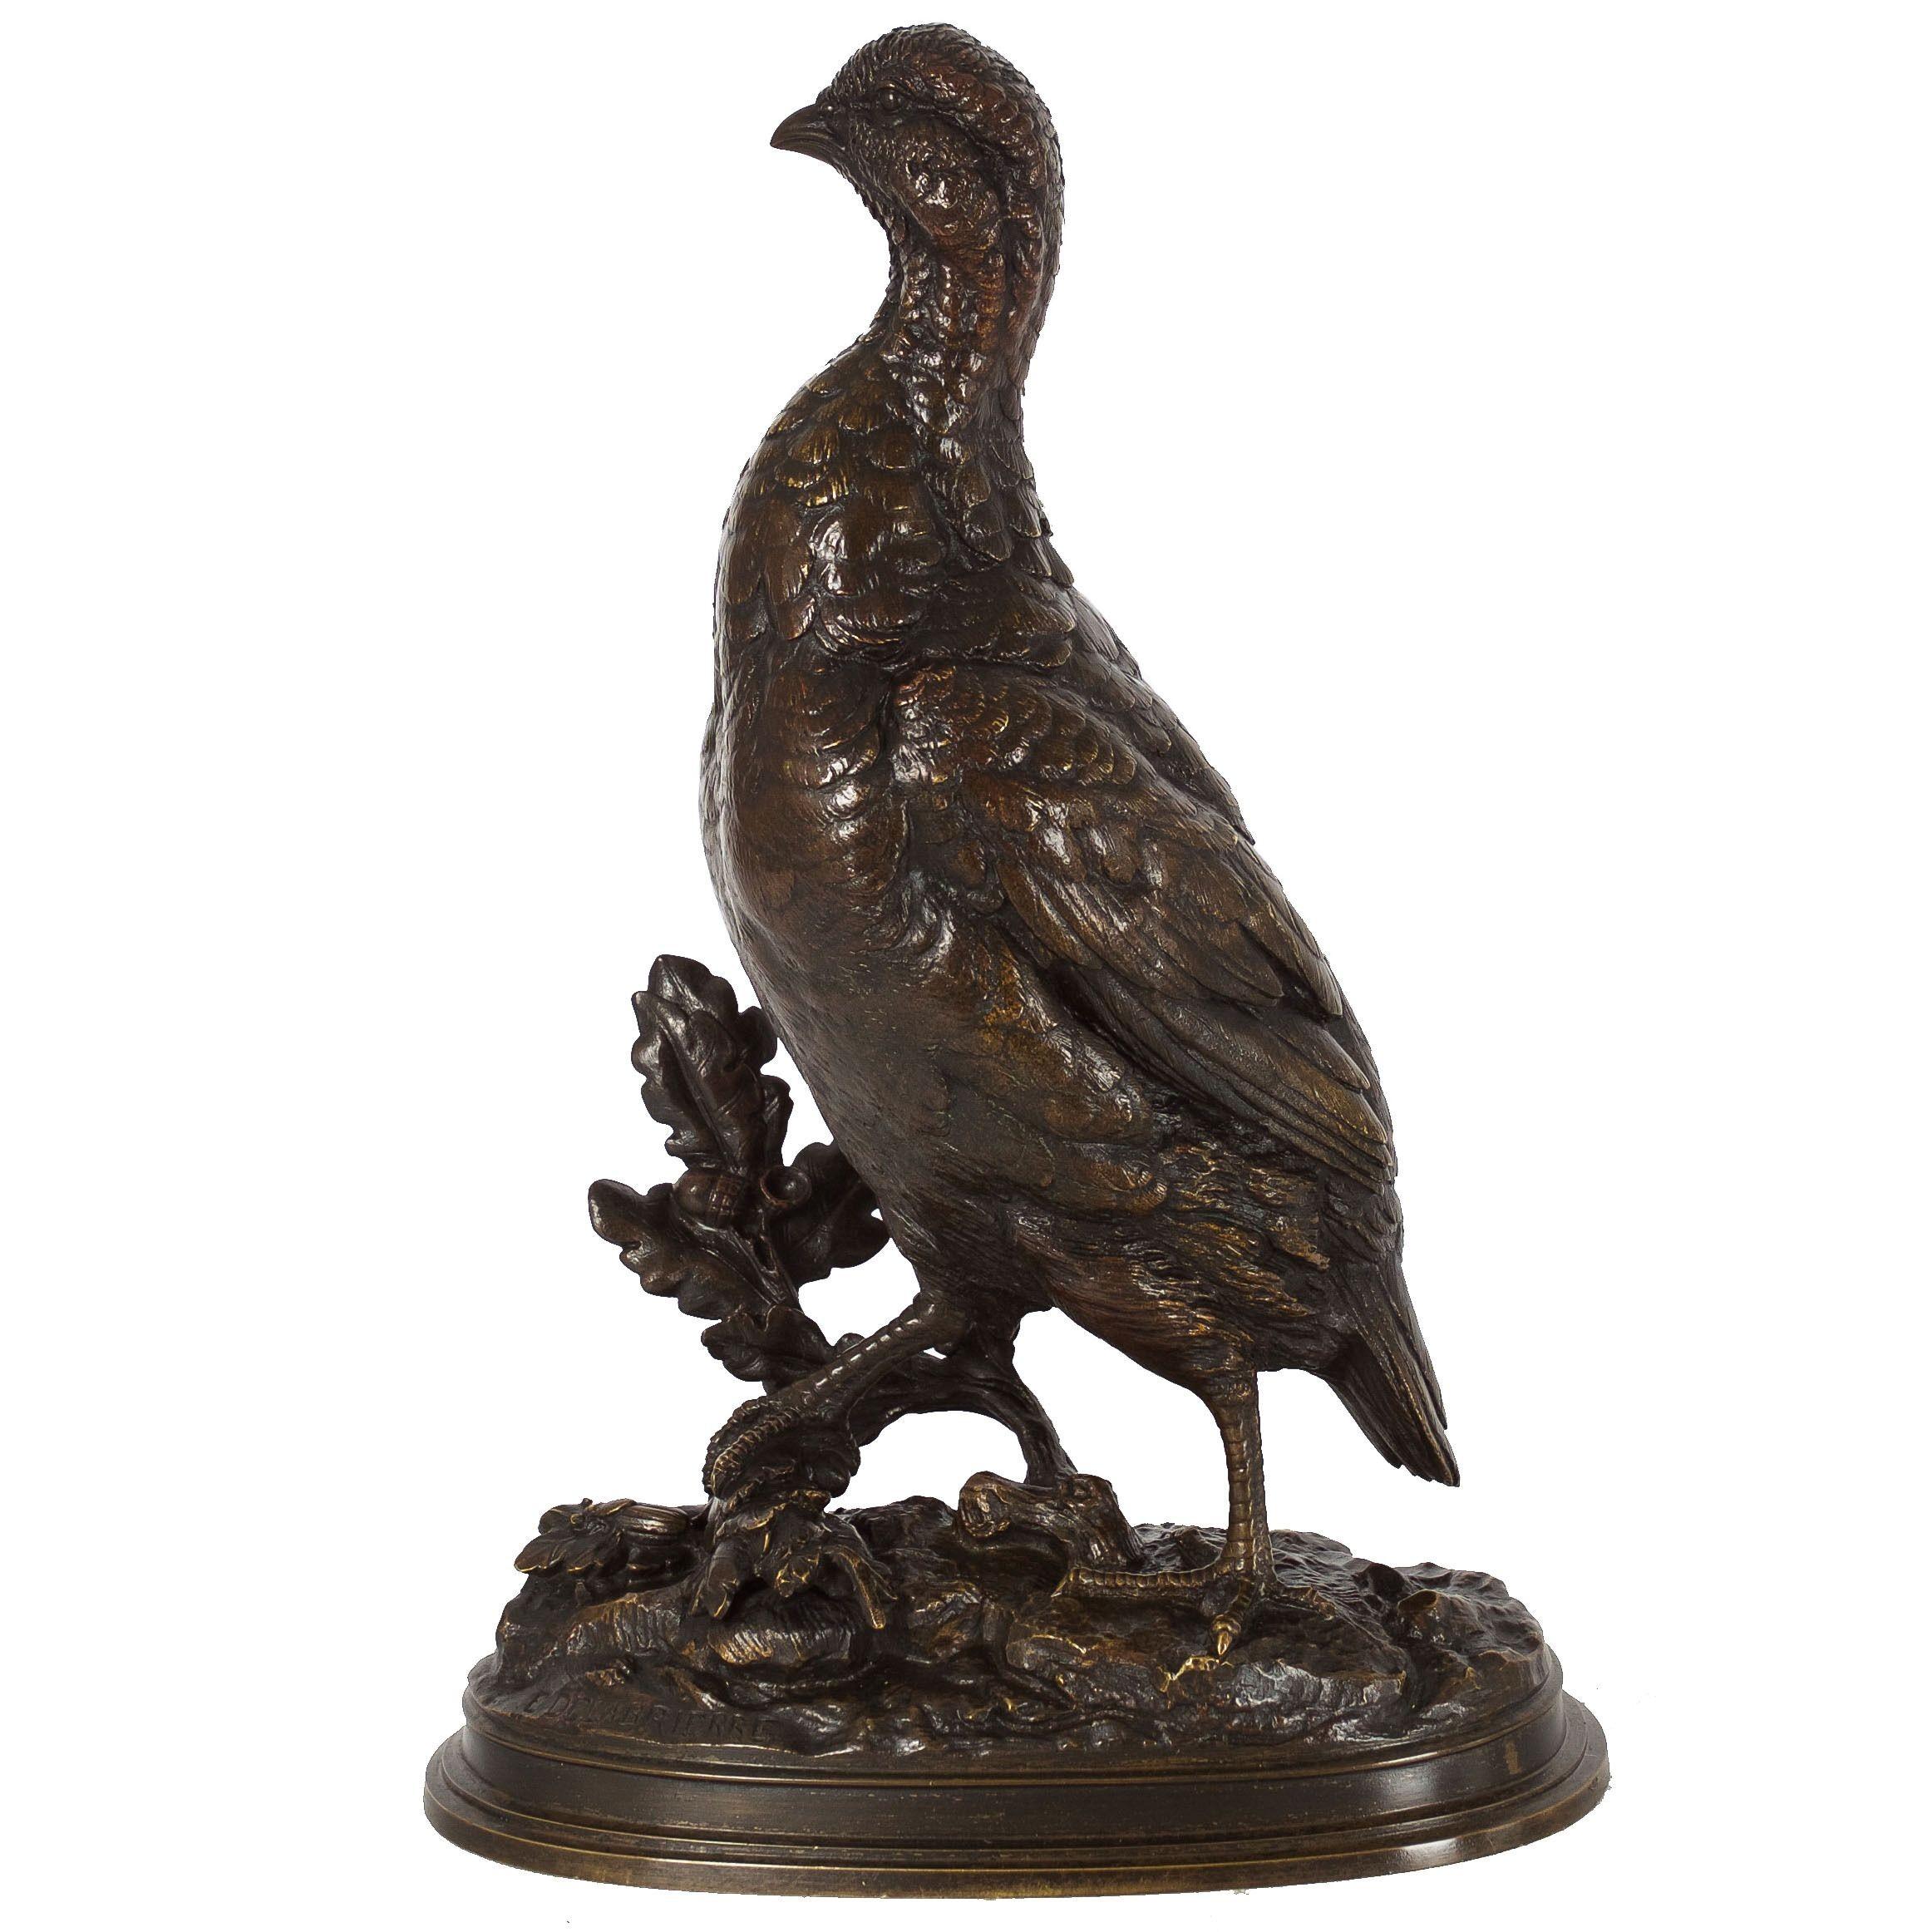 An exquisite sand-cast model of a walking grouse, it is an endearing look at this lively game bird. Typical of Delabrierre's work, this casting quality is expert with fine chiseled detail and texture throughout bringing life to the individual layers